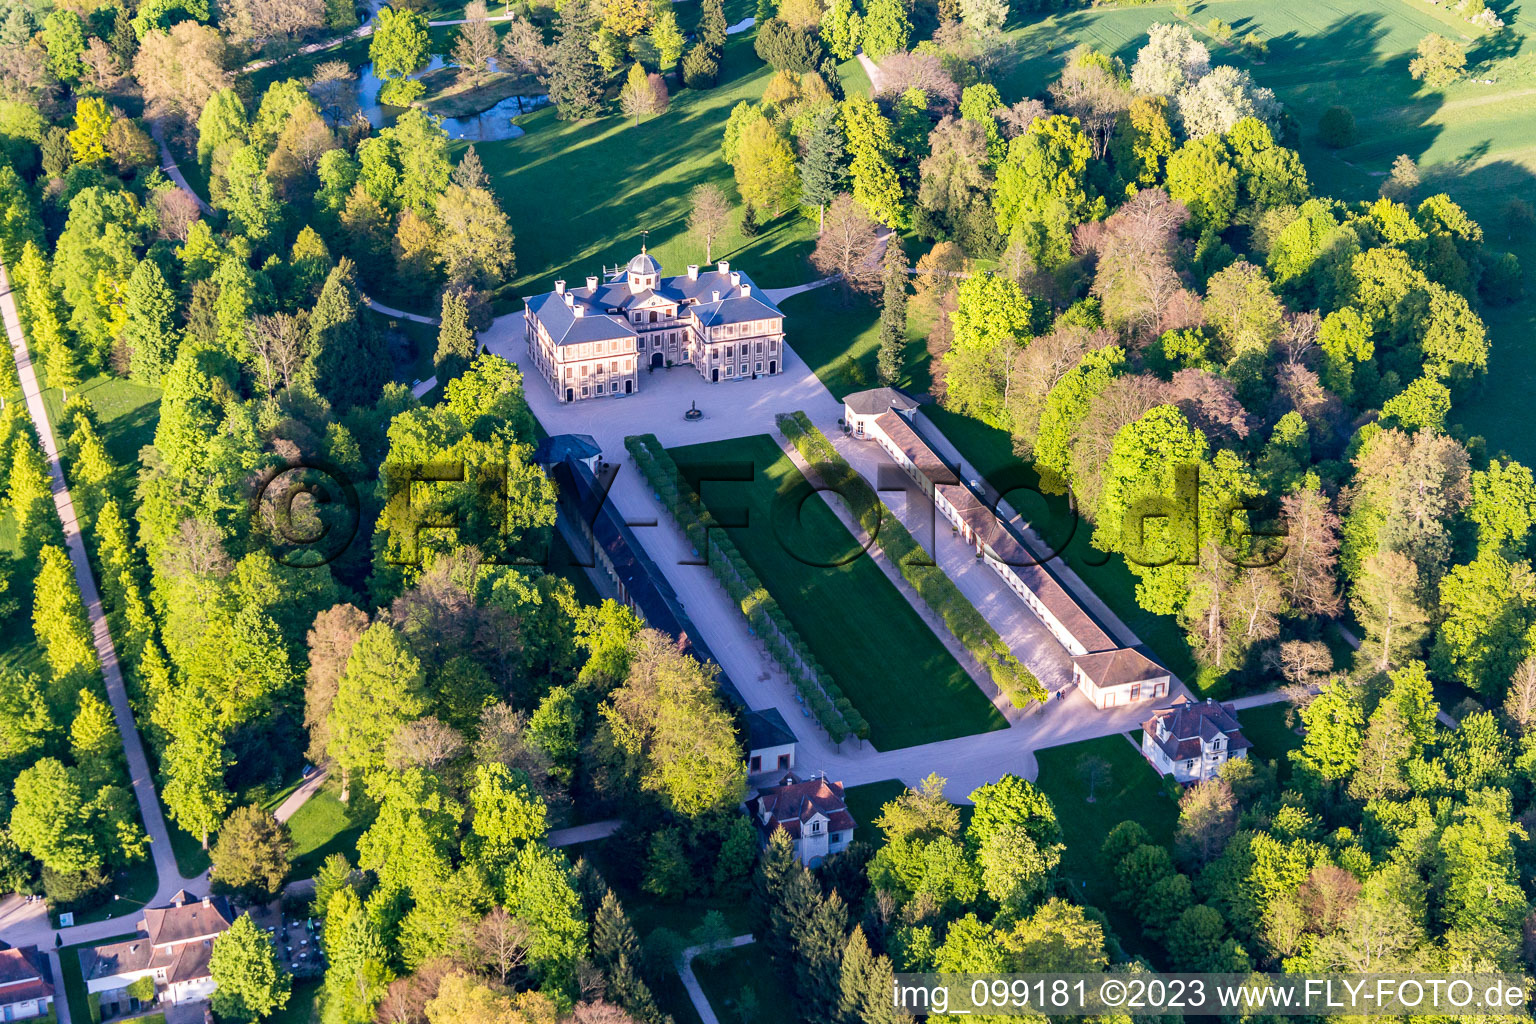 Building complex in the park of the castle Favorite in Rastatt in the state Baden-Wurttemberg, Germany from above